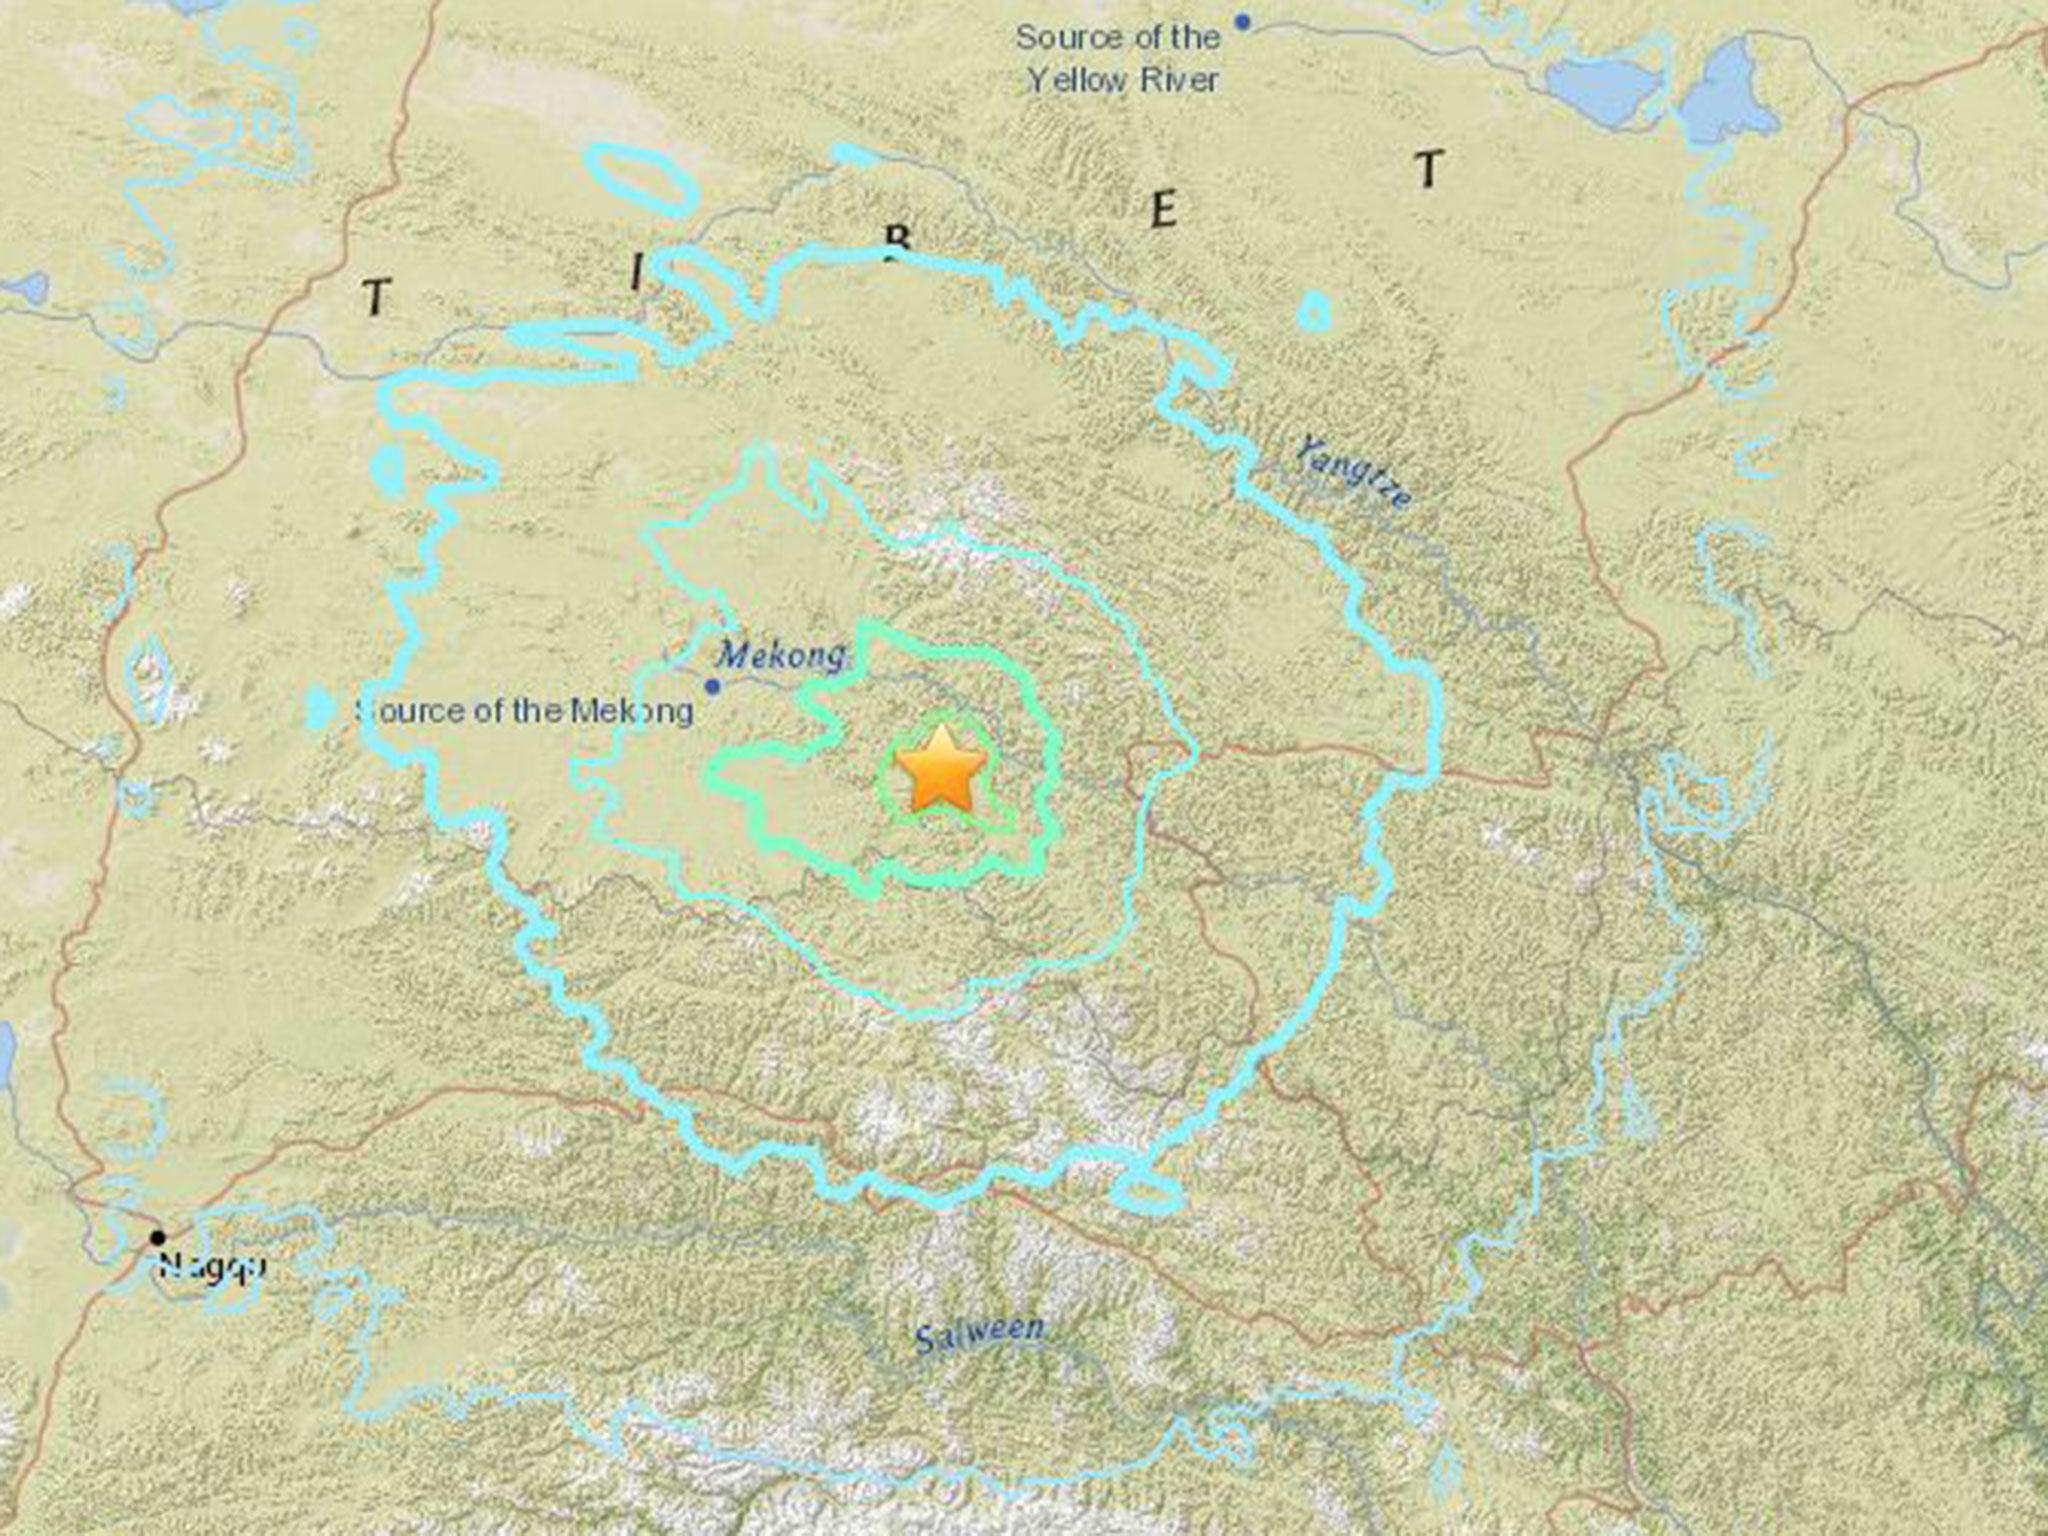 The quake hit in the Himalayan region at a depth of 25km (16 miles) about 300km (186 miles) northwest of the city of Qamdo